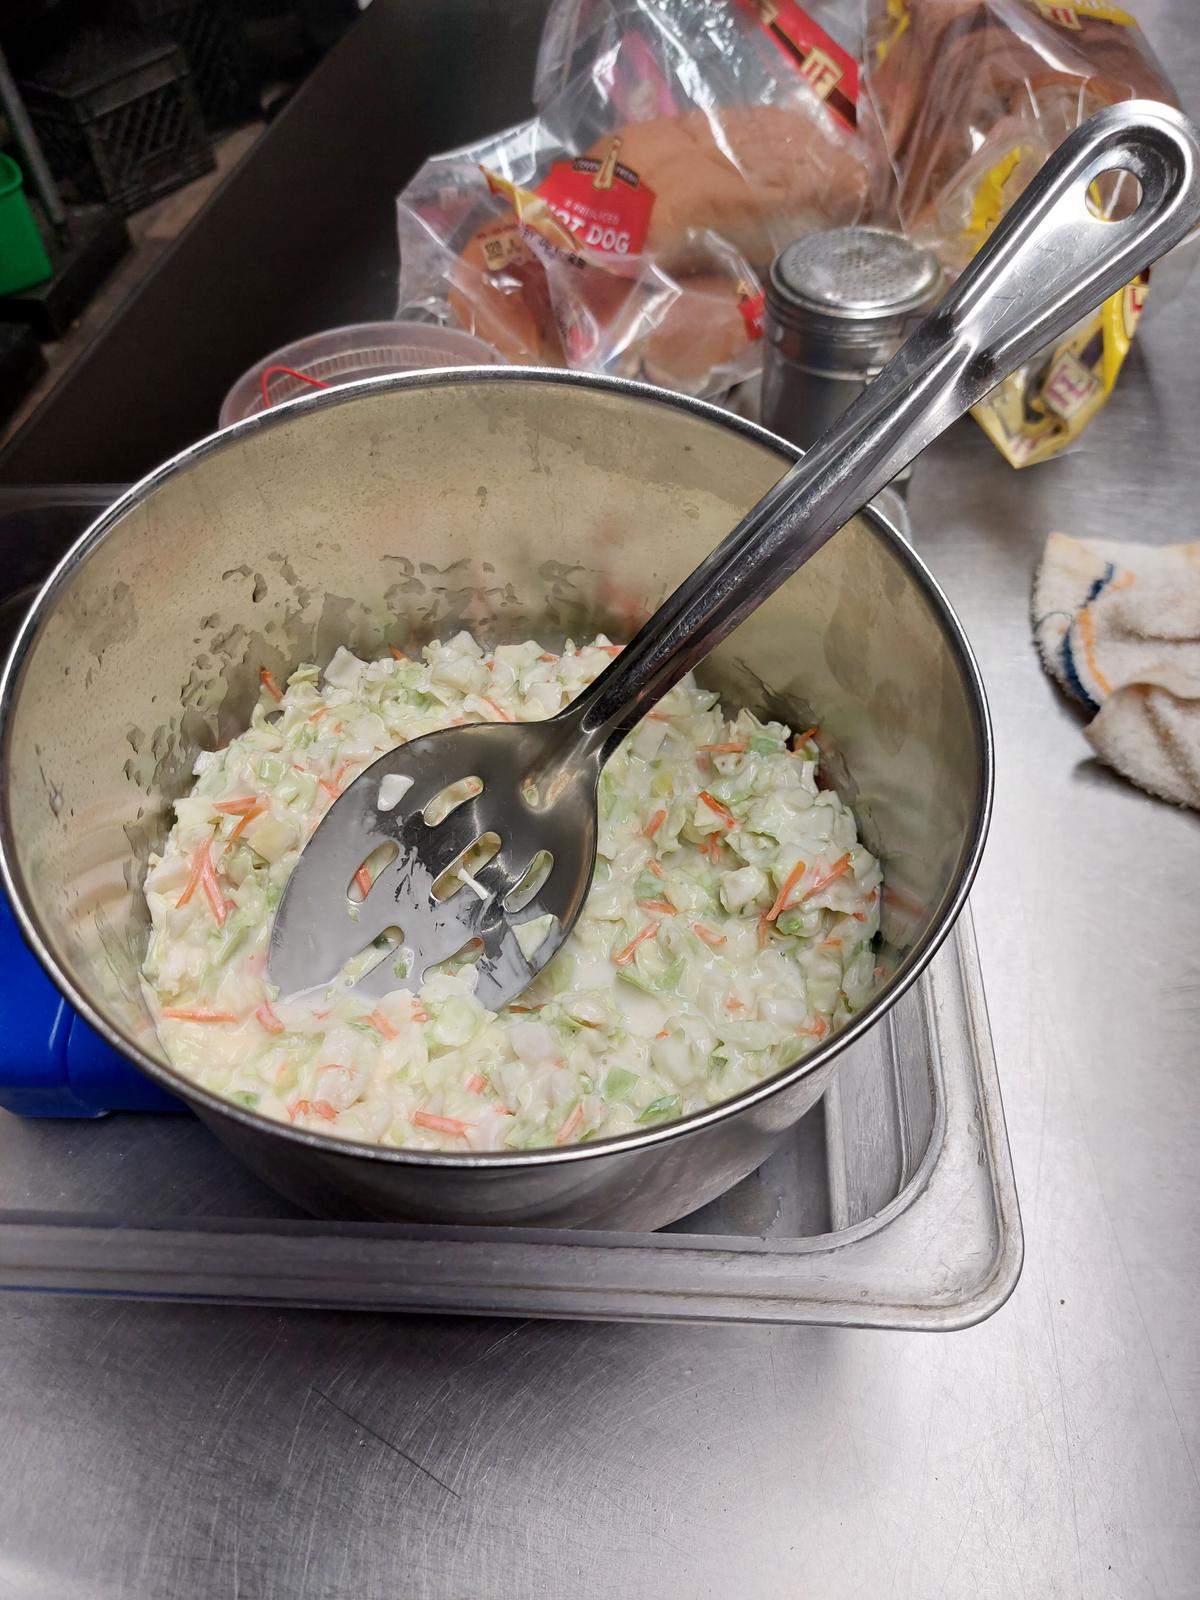 Their coleslaw is creamy-style with organic apple cider vinegar. (Kevin Revolinski)